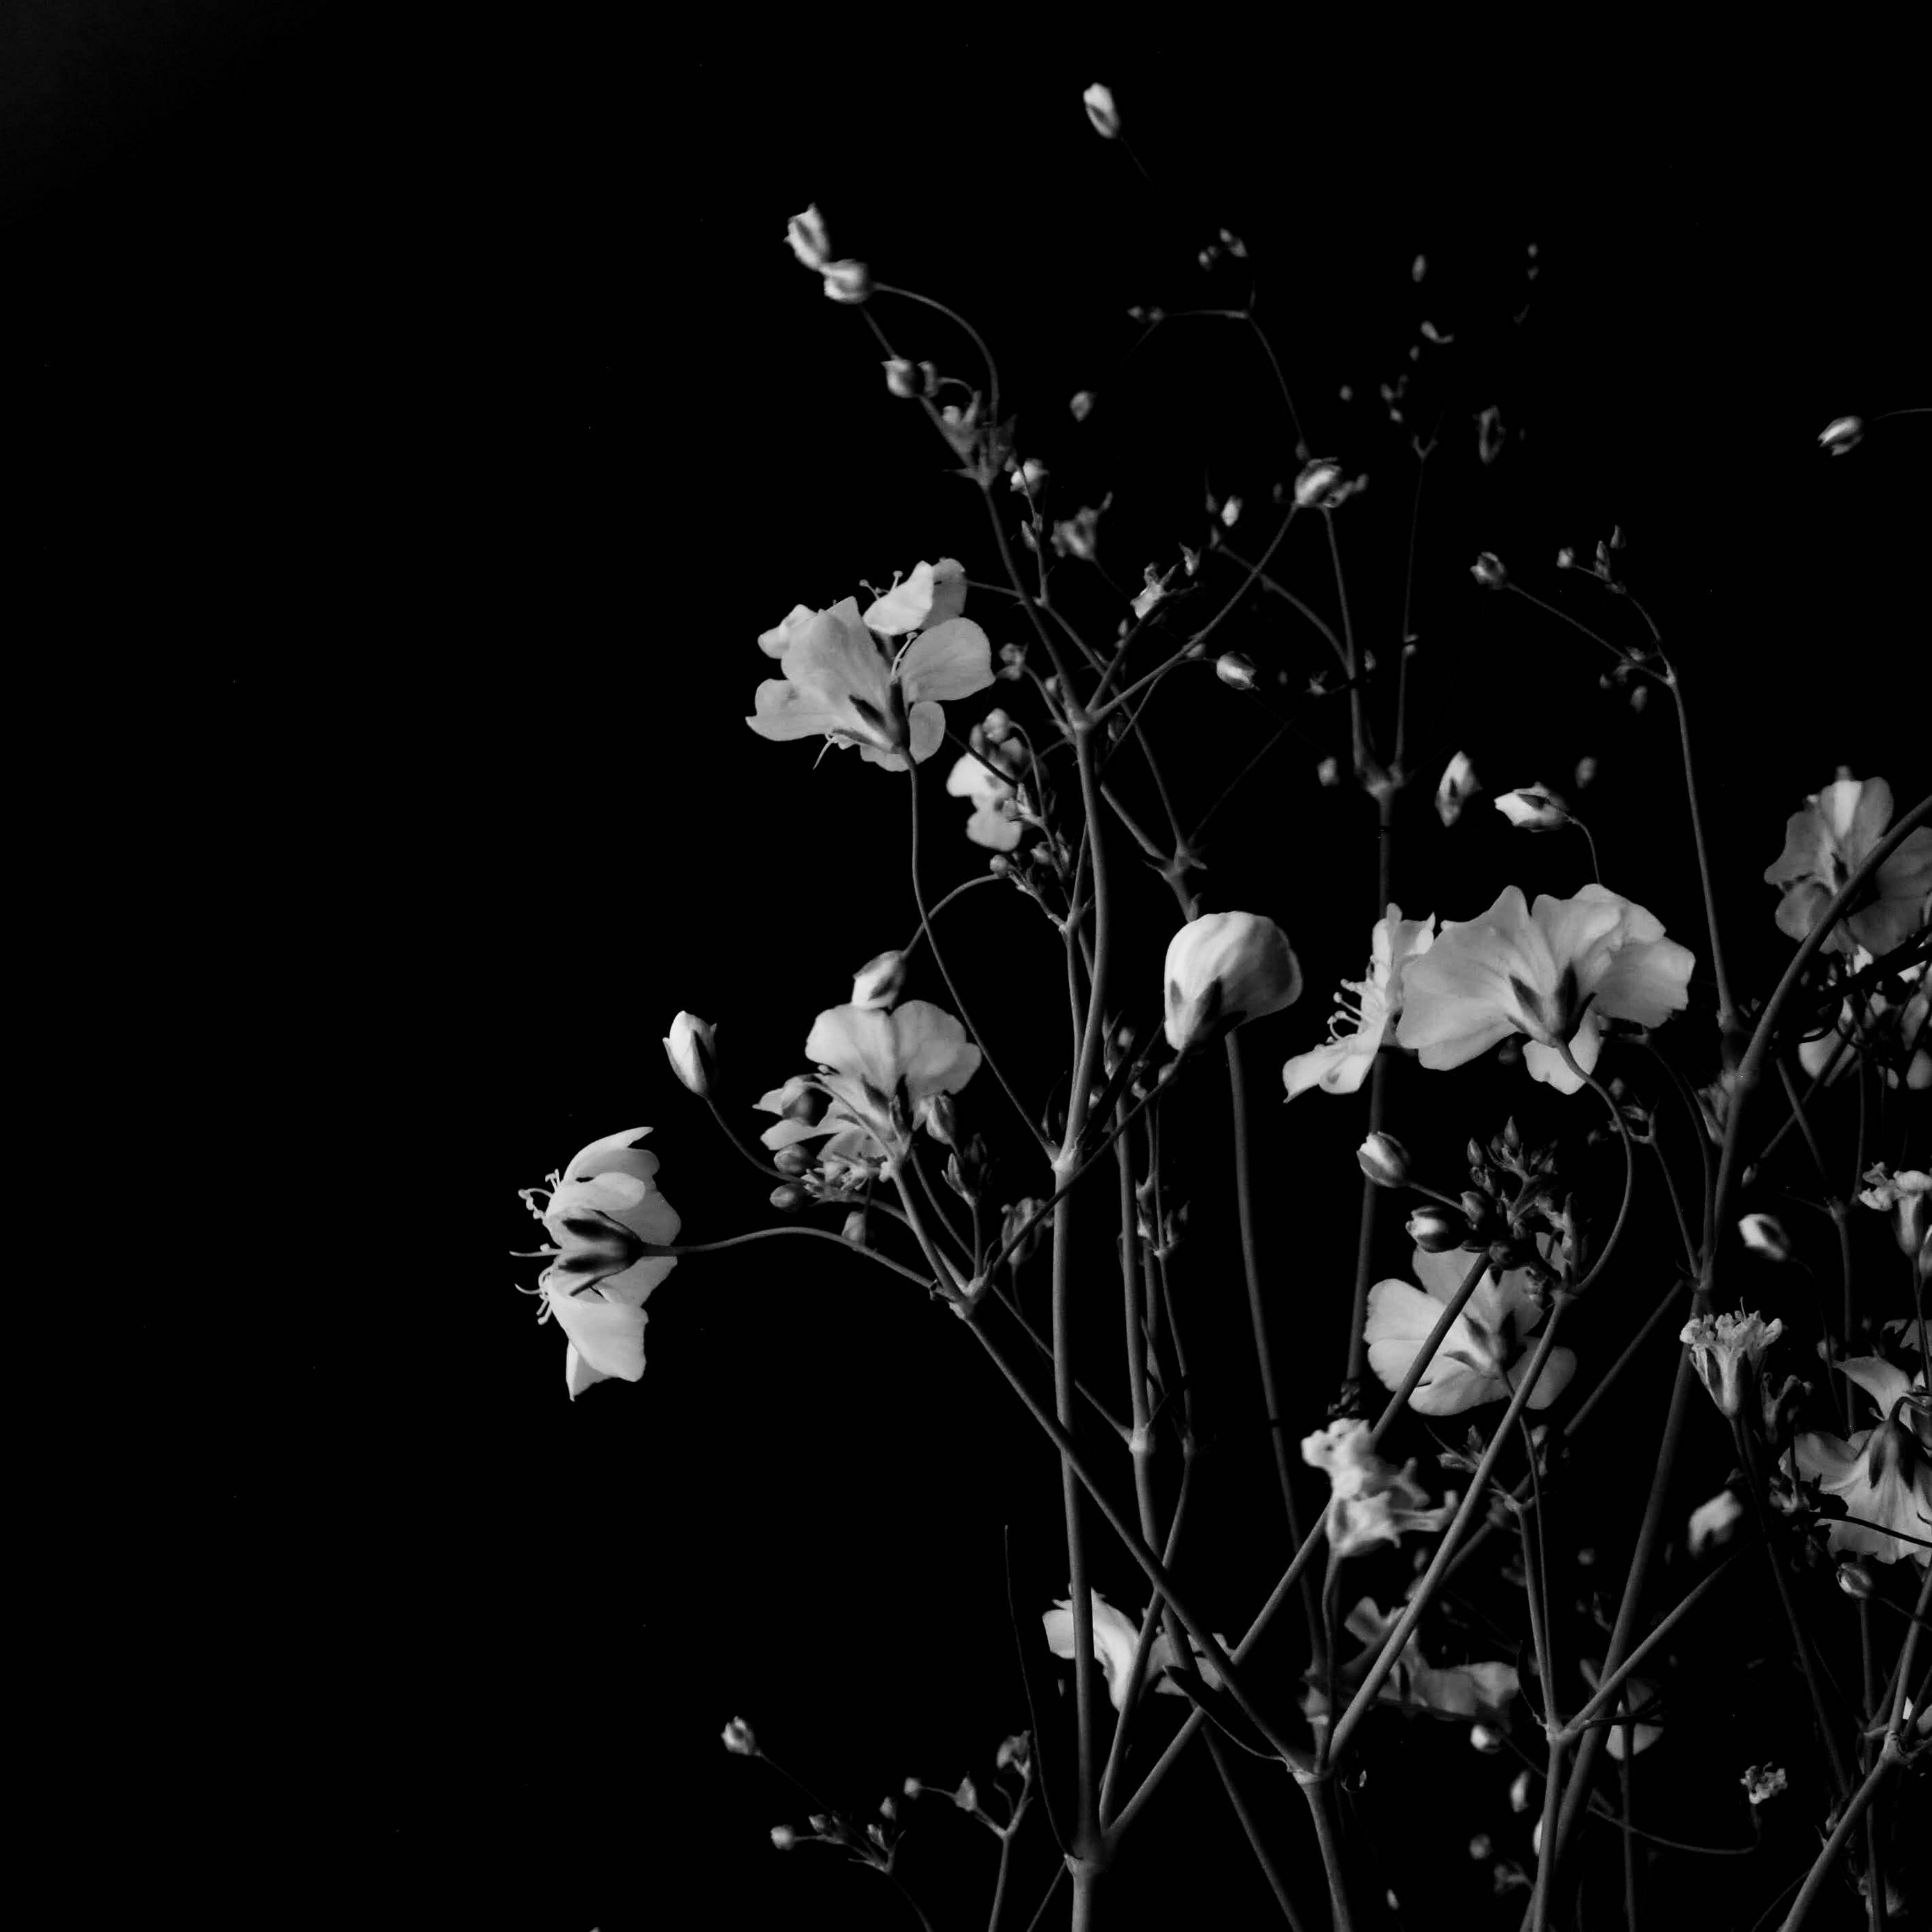 A black and white photo of flowers - Black and white